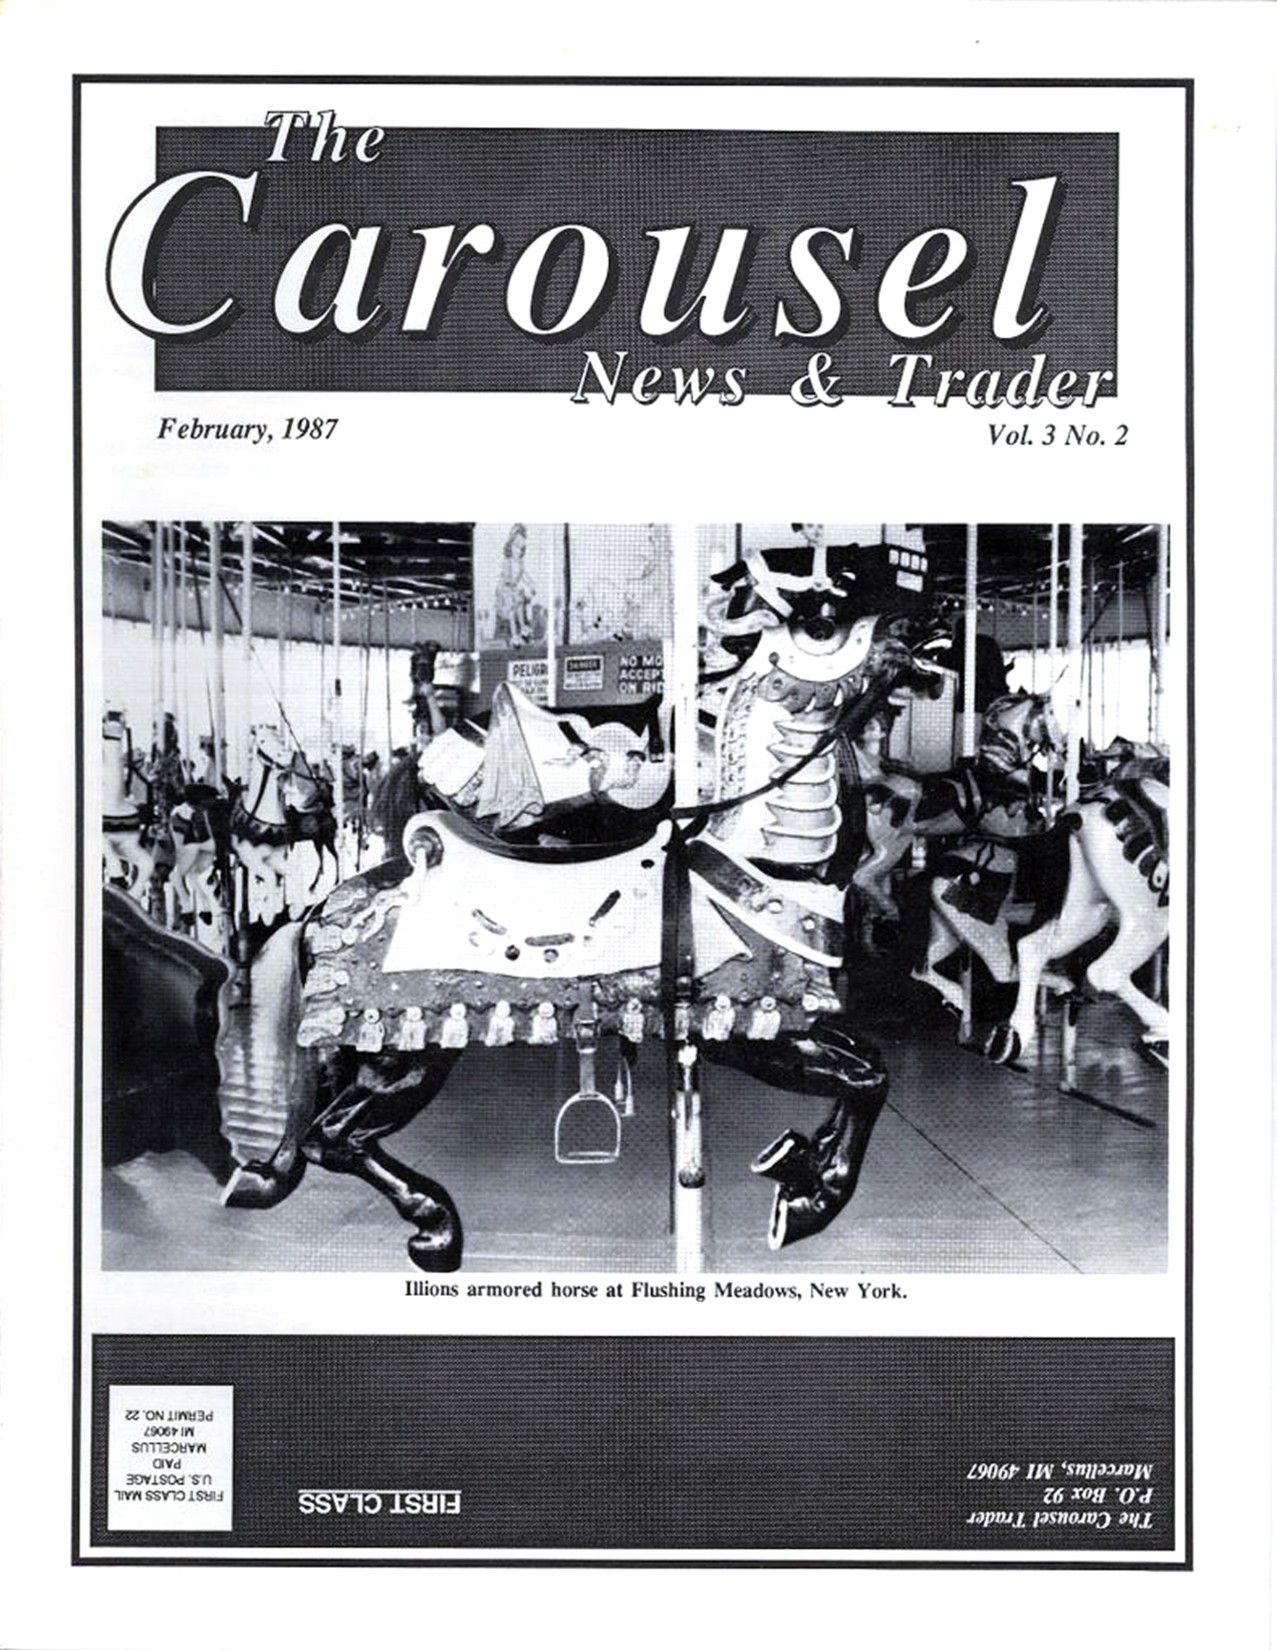 Carousel-News-cover-02_1987-Illions-Flushing-Meadows-NY